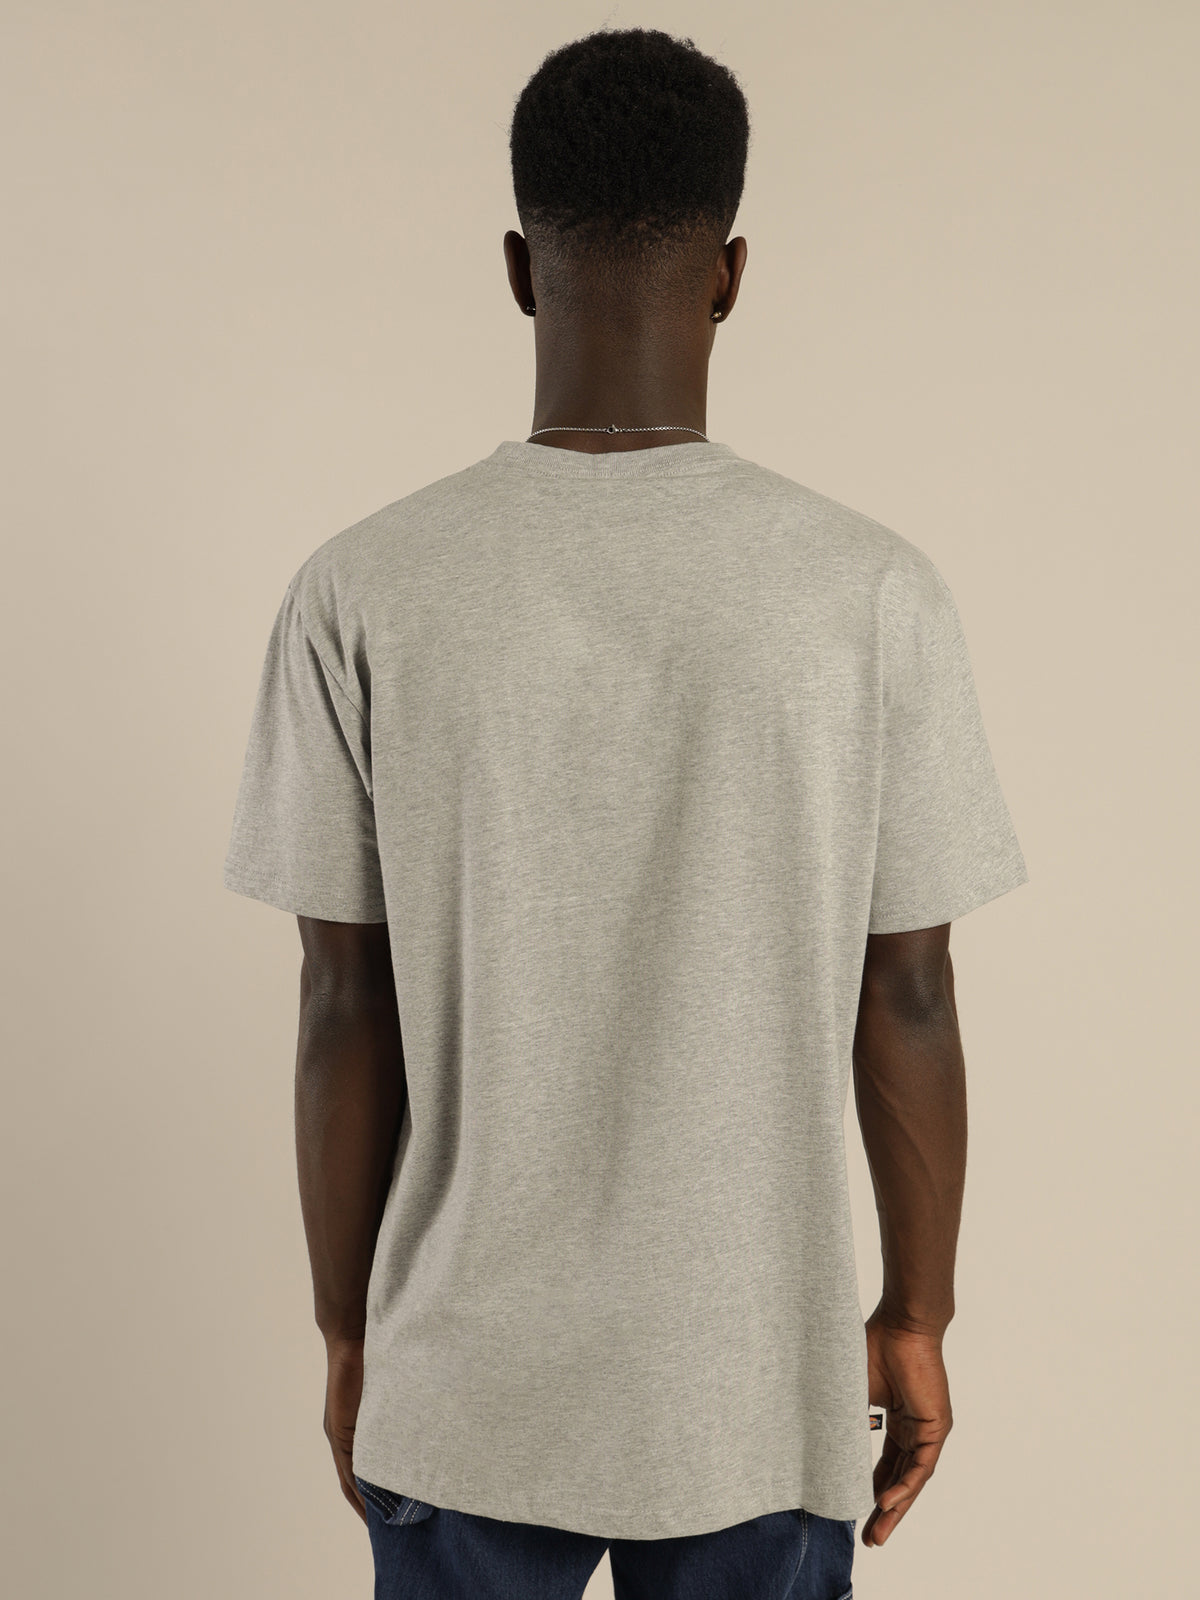 H.S Rockwood T-Shirt in Grey Marle